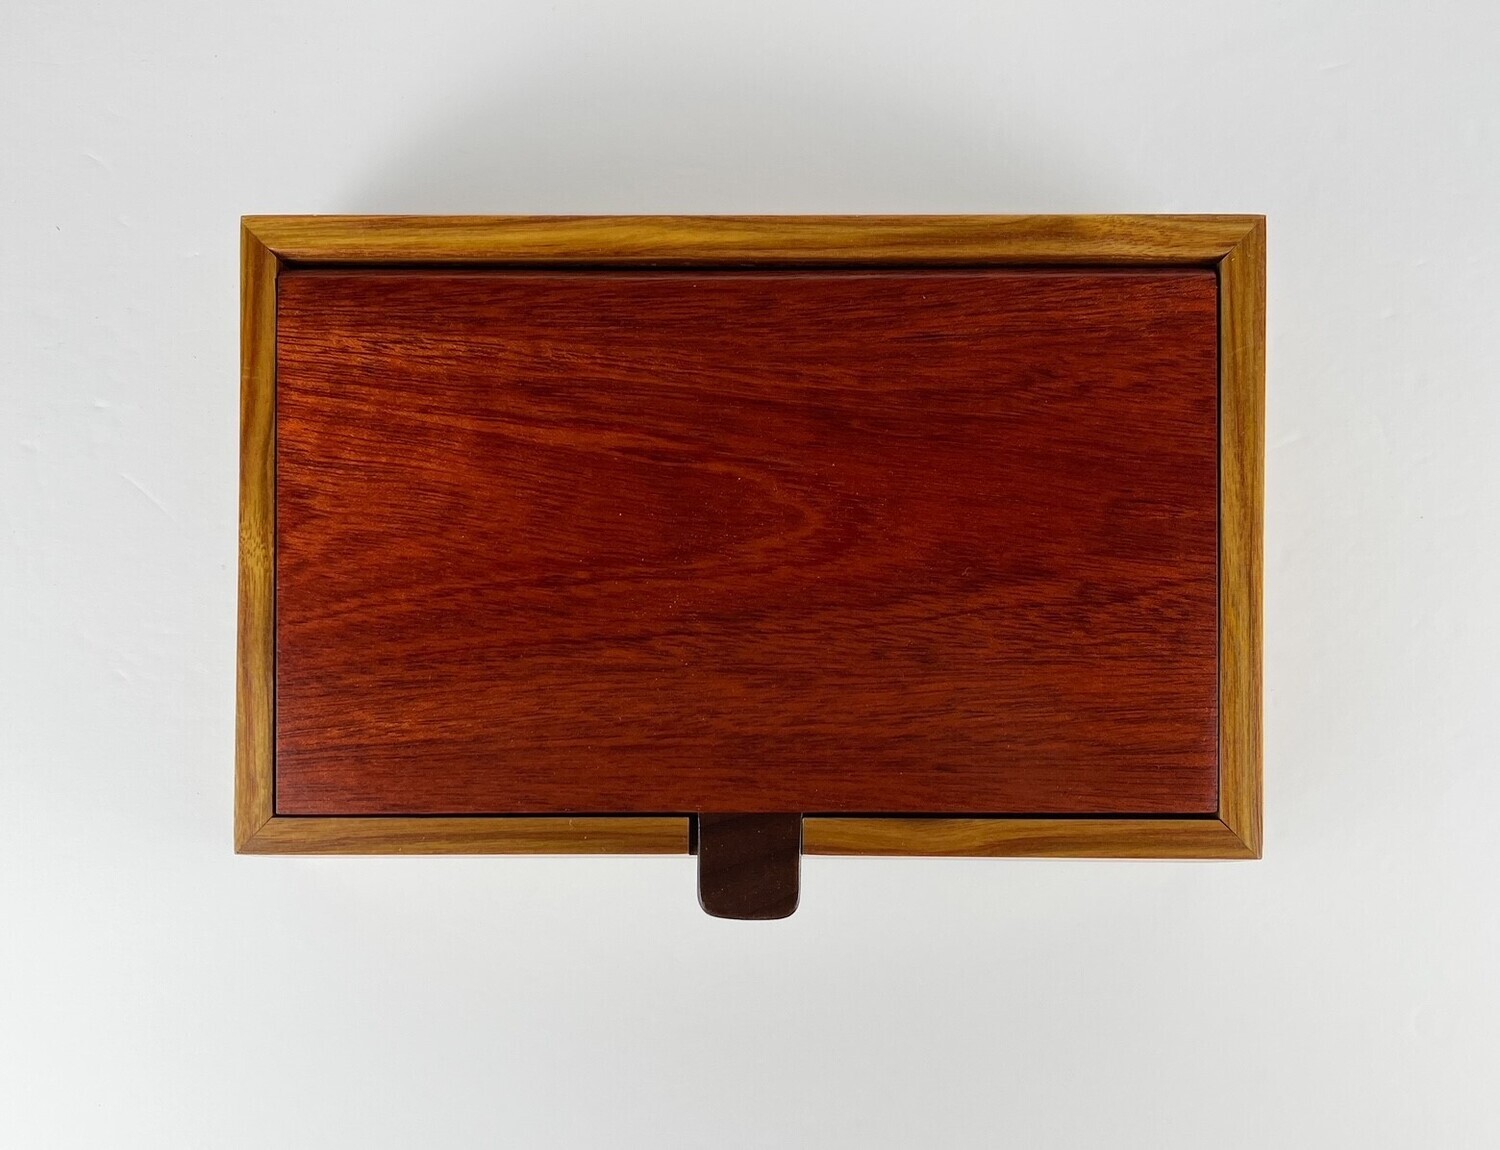 Wooden Keepsake Box Canary Wood, Bloodwood Top, Santos, W/Rosewood Dividers 10.25x6.75x2.5"